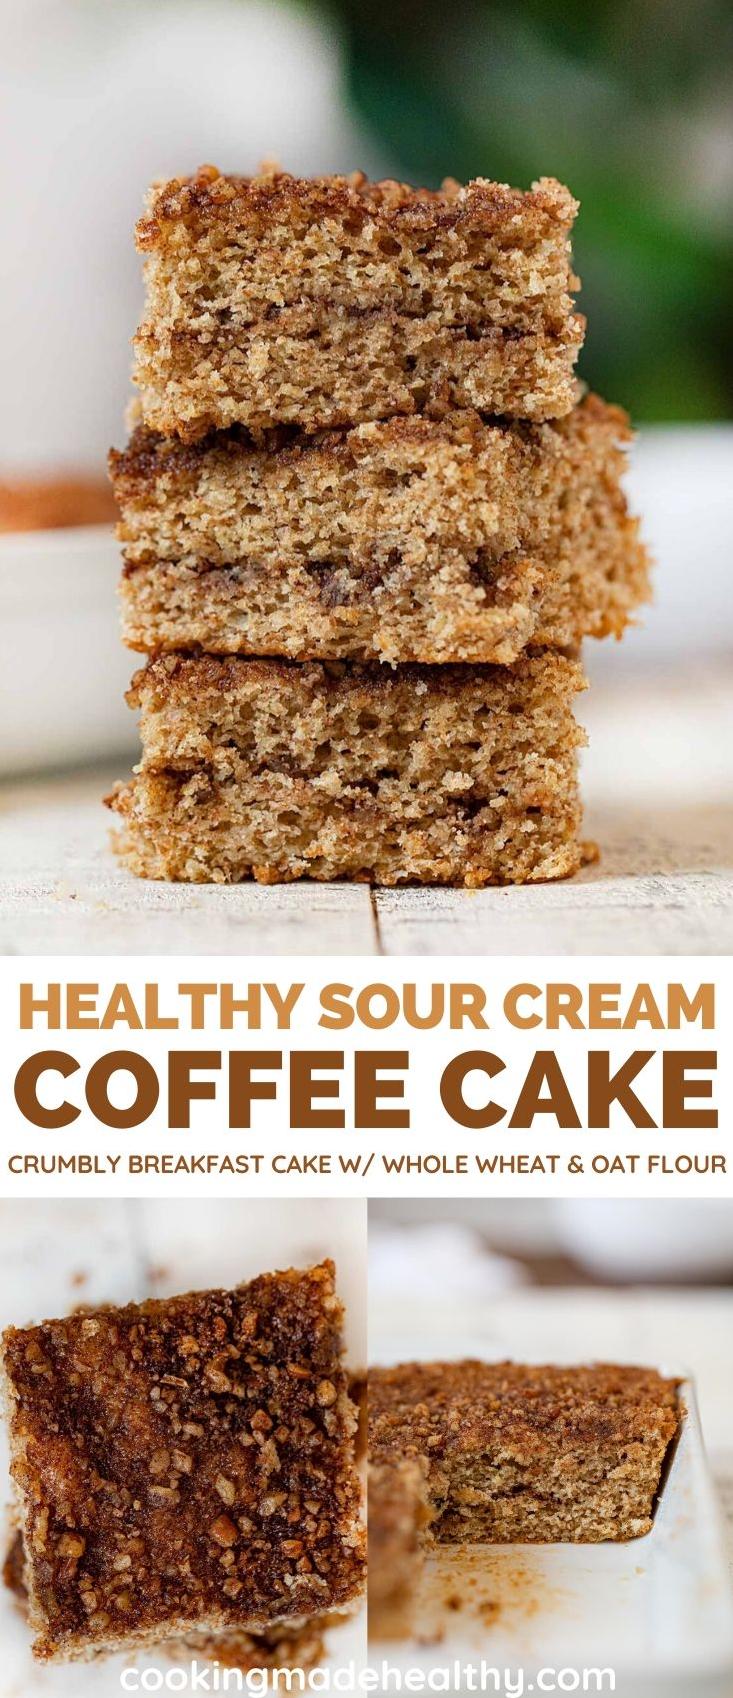  This recipe is sure to become a favorite among all the coffee and cake lovers out there.